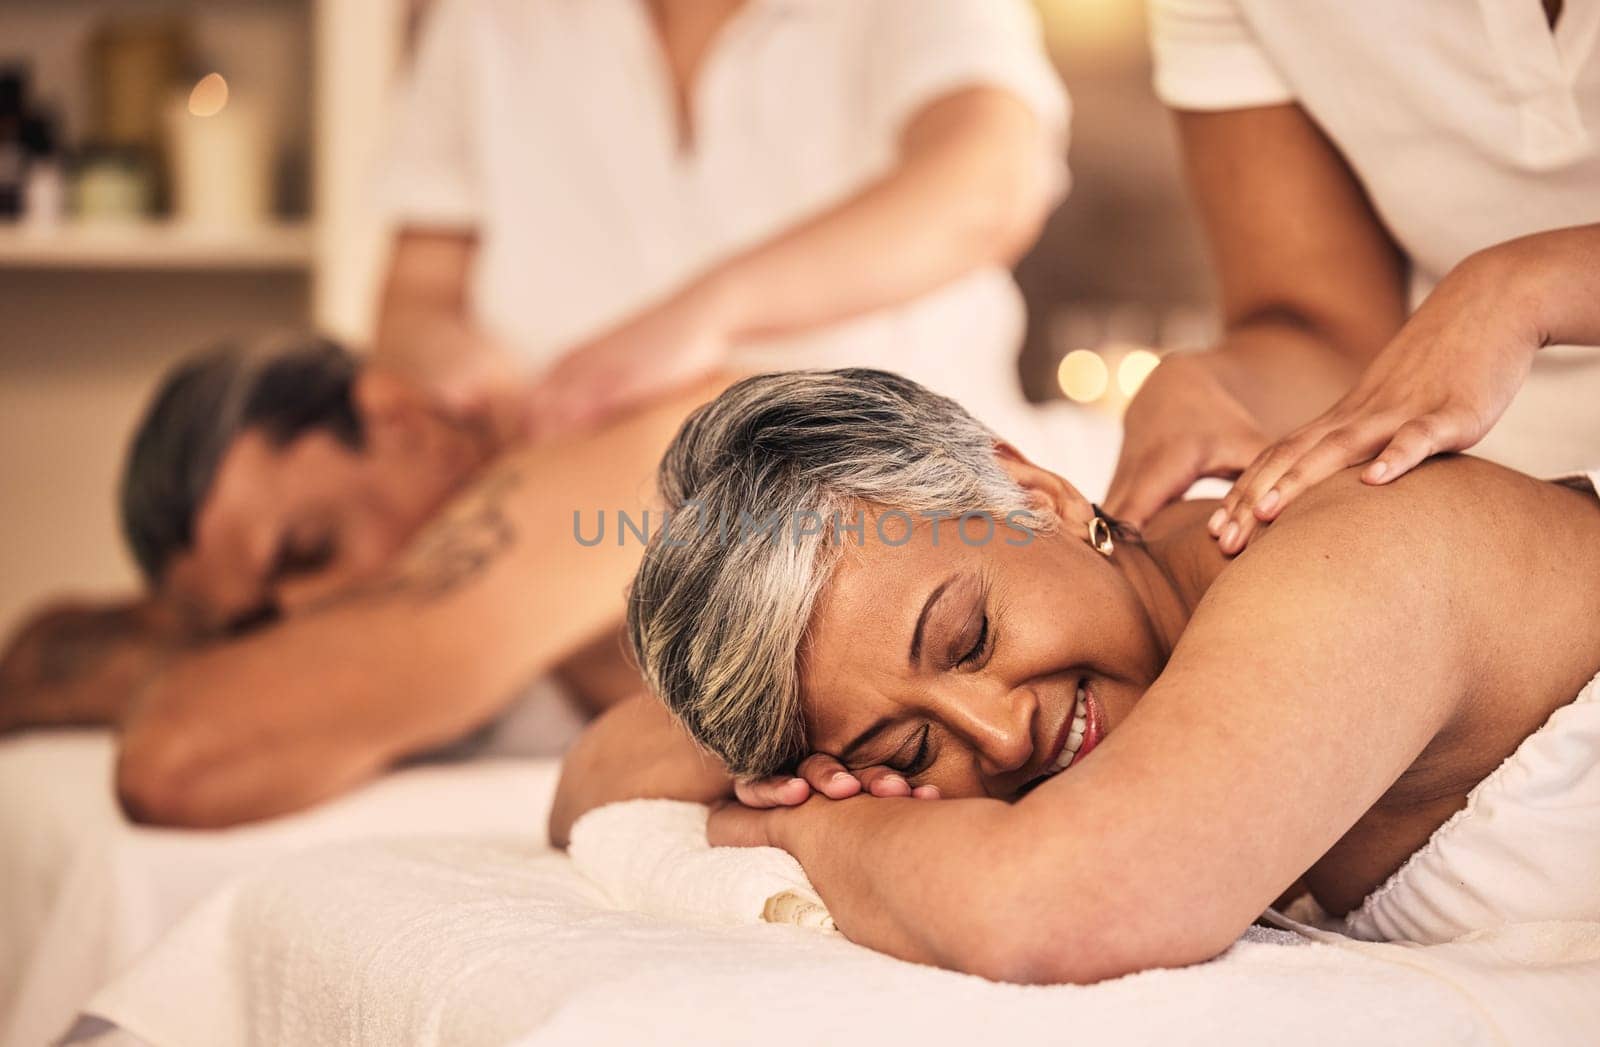 Relax, retirement and a couple at the spa for a massage together for peace, wellness or bonding. Luxury, hospitality or body care with a senior woman and man in a beauty salon for physical therapy by YuriArcurs